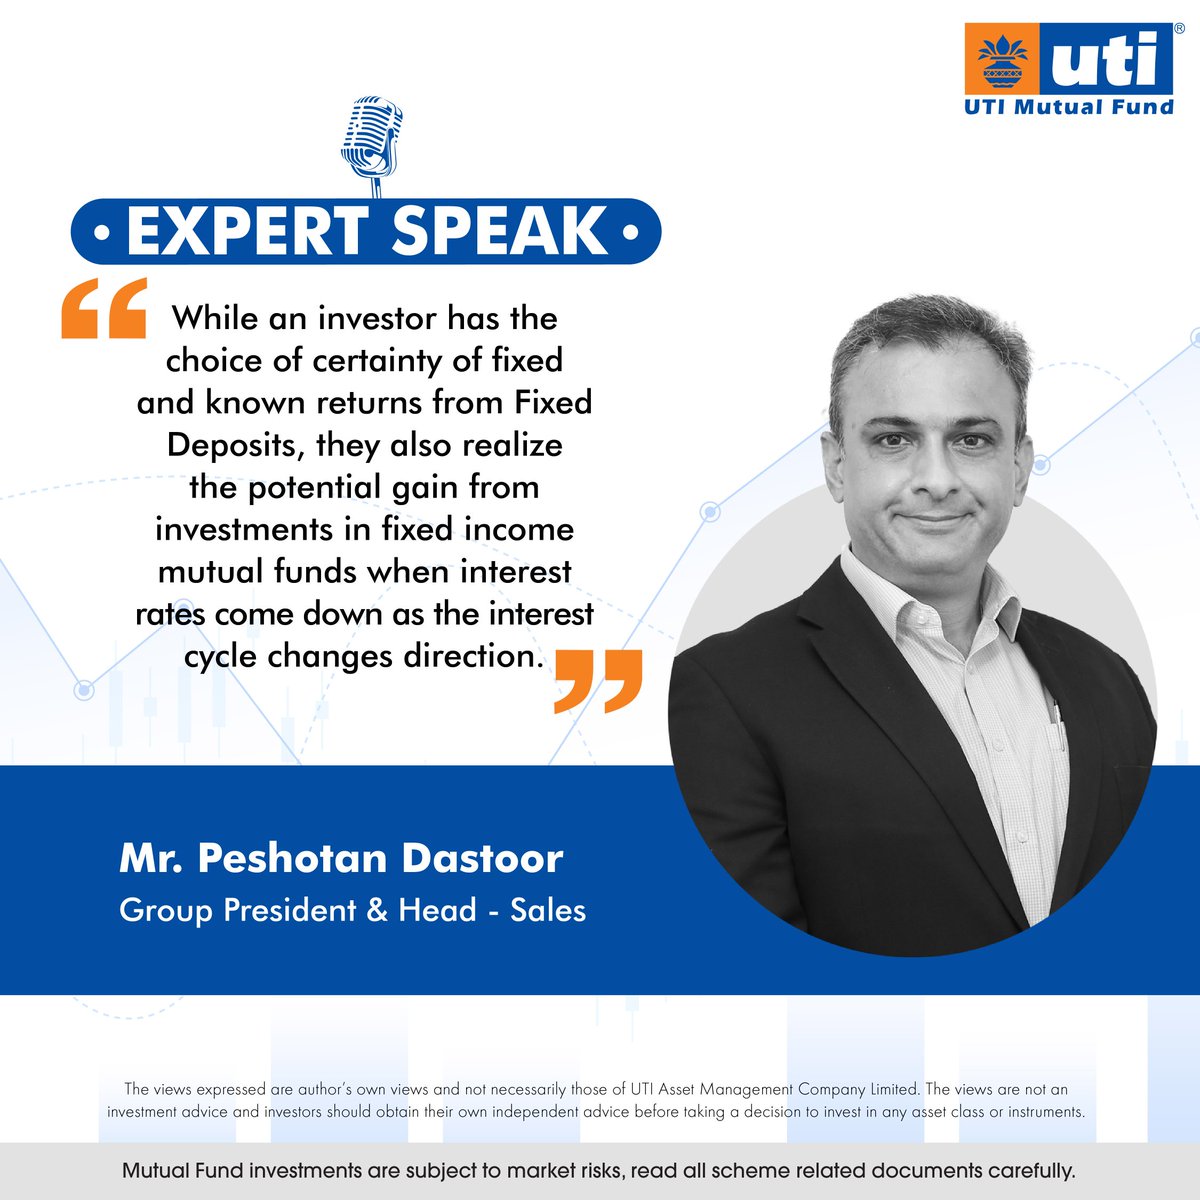 Mr. Peshotan Dastoor, Group President & Head - Sales, talks about tax applicability on mutual funds w.e.f. April 1, 2023 and it’s impact.
Read full article: bit.ly/40JARMX

#UTIMutualFund #ExpertSpeak #Tax #MutualFunds